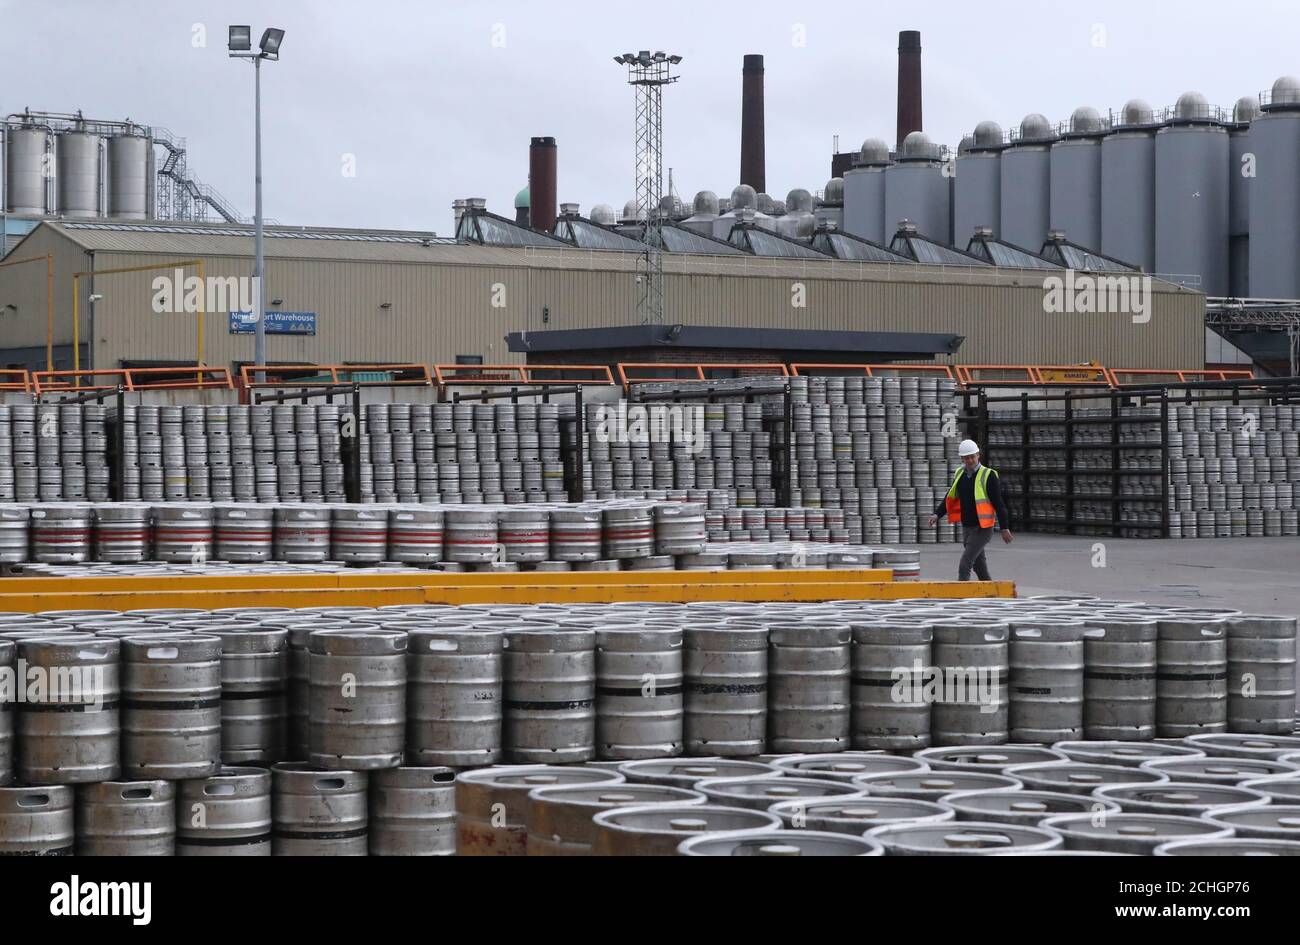 Logistics Manager Colin Griffey with Kegs of Guinness stacked ready for distribution at the St James's Gate Guinness brewery in Dublin as production ramps up in preparation for bars re-opening in the UK and Ireland. Stock Photo